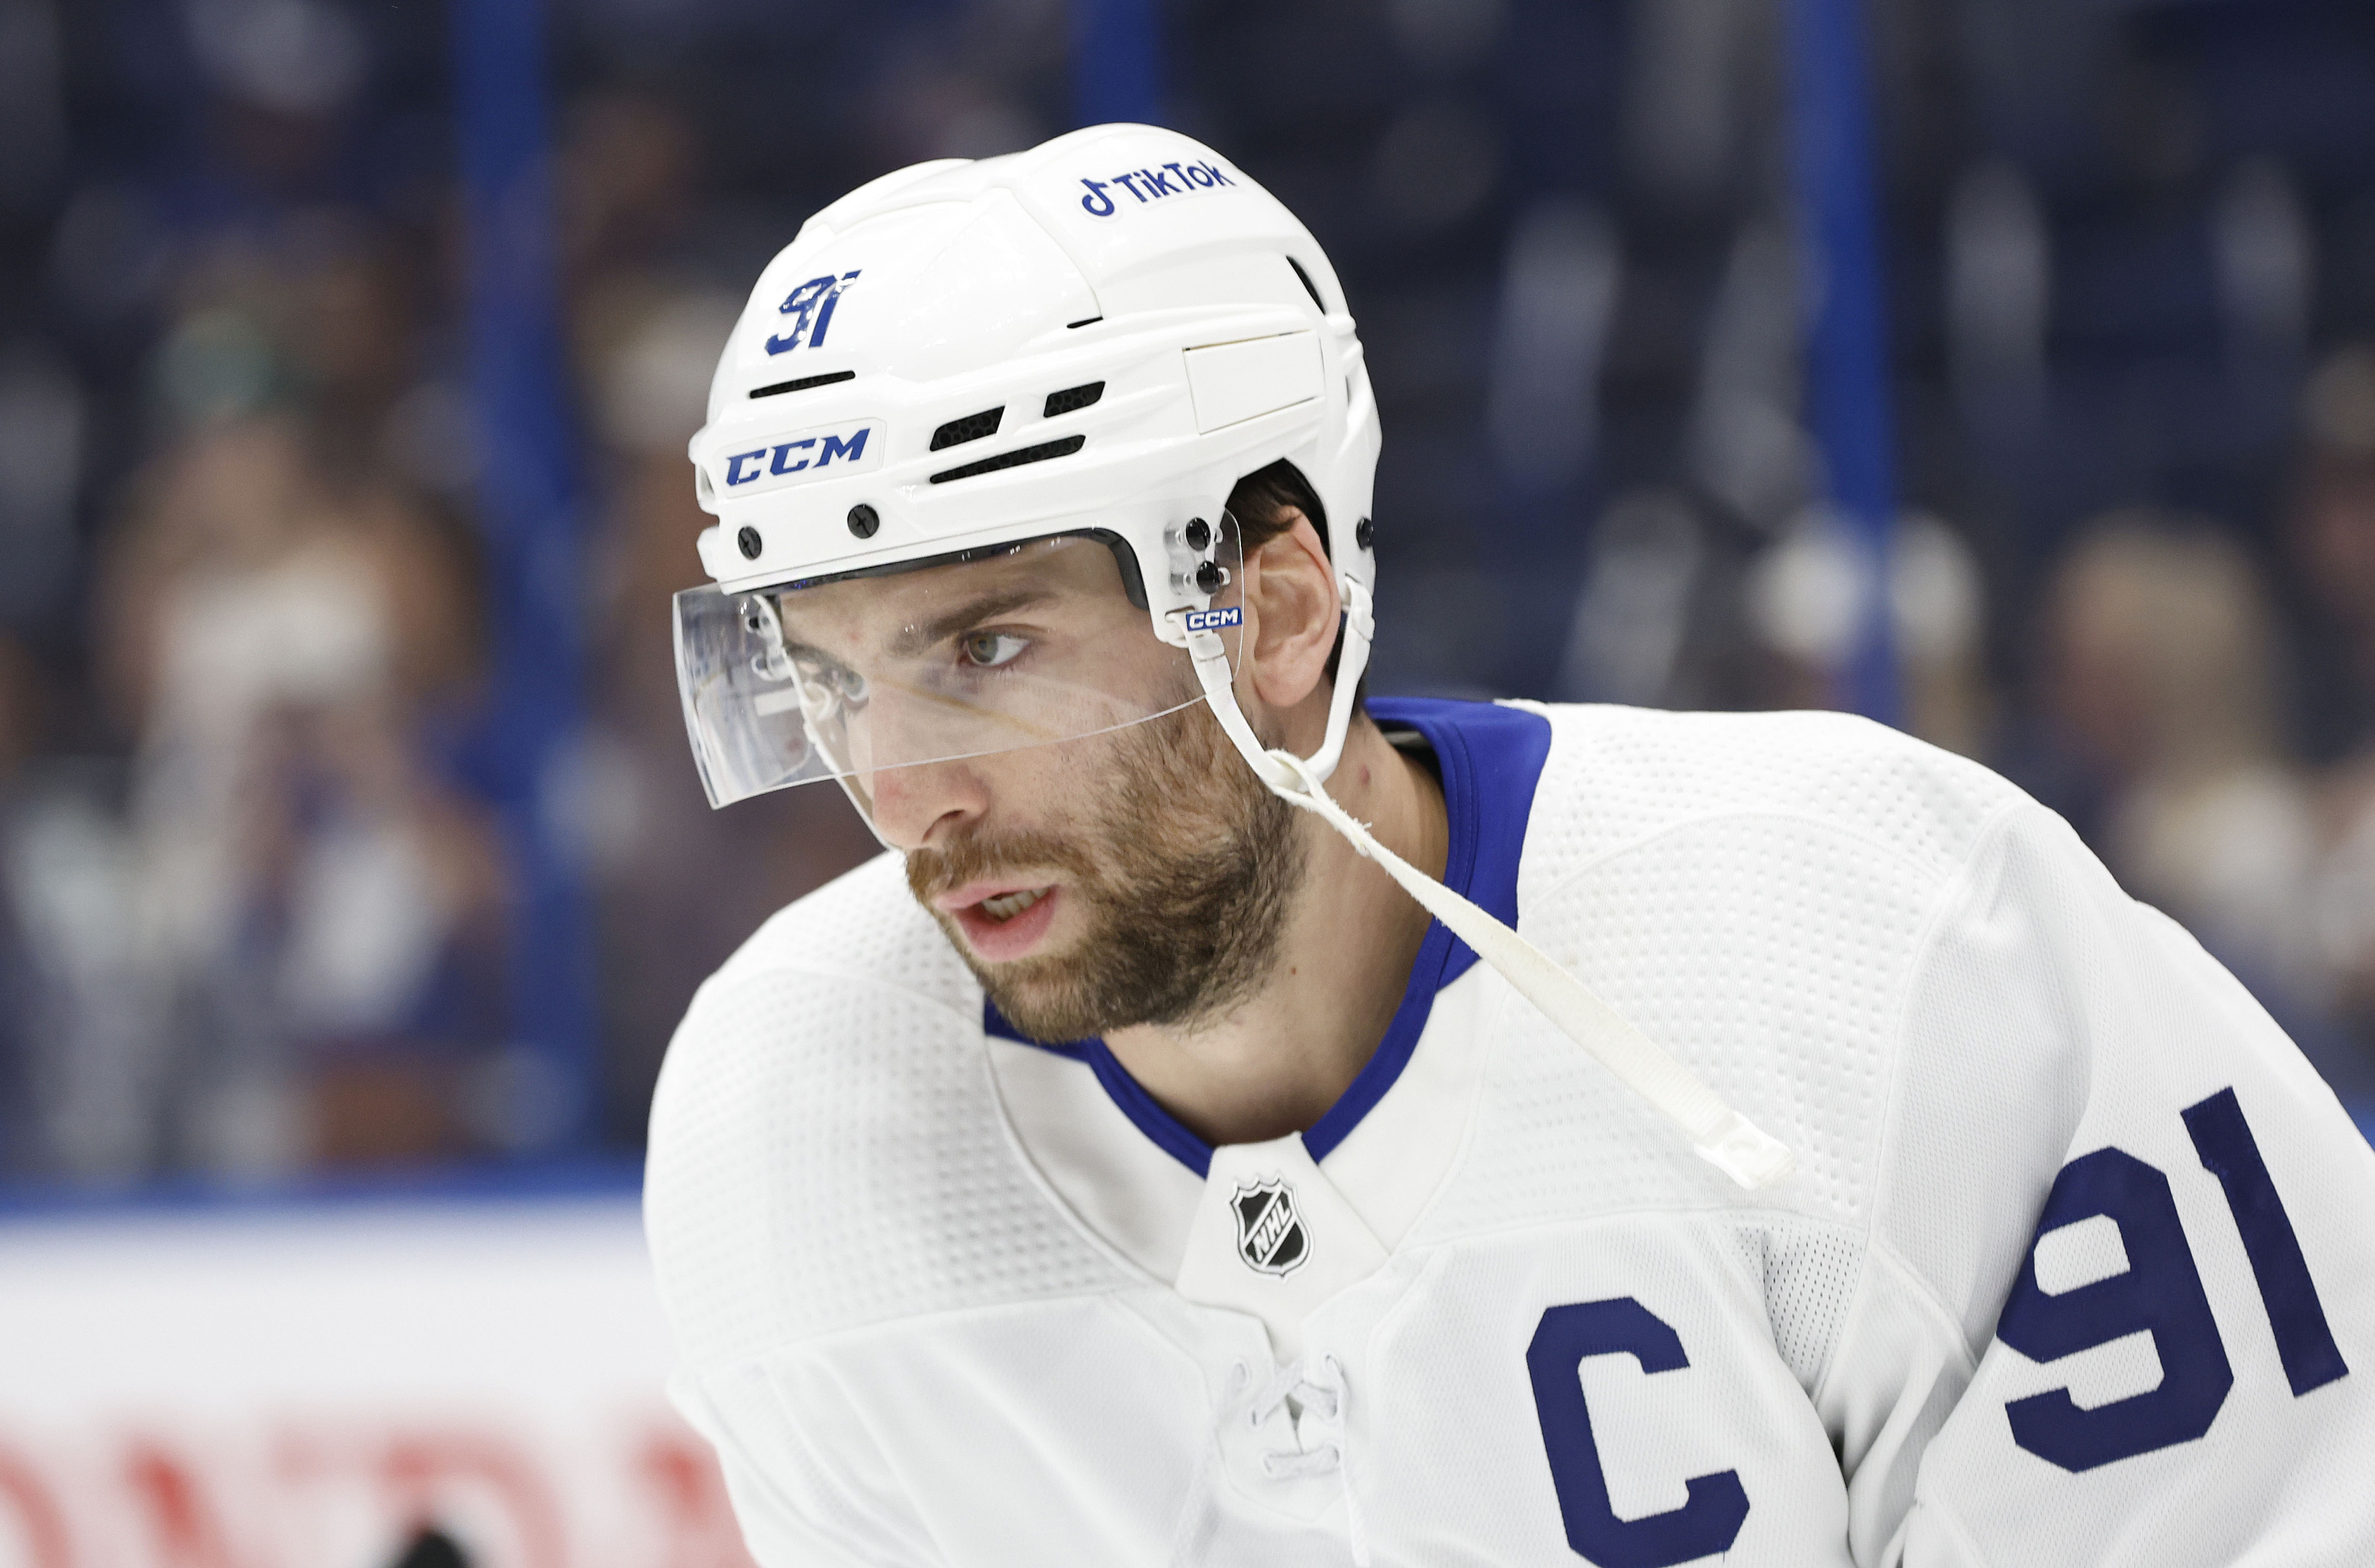 Toronto Maple Leafs: John Tavares needs to lead from the front in